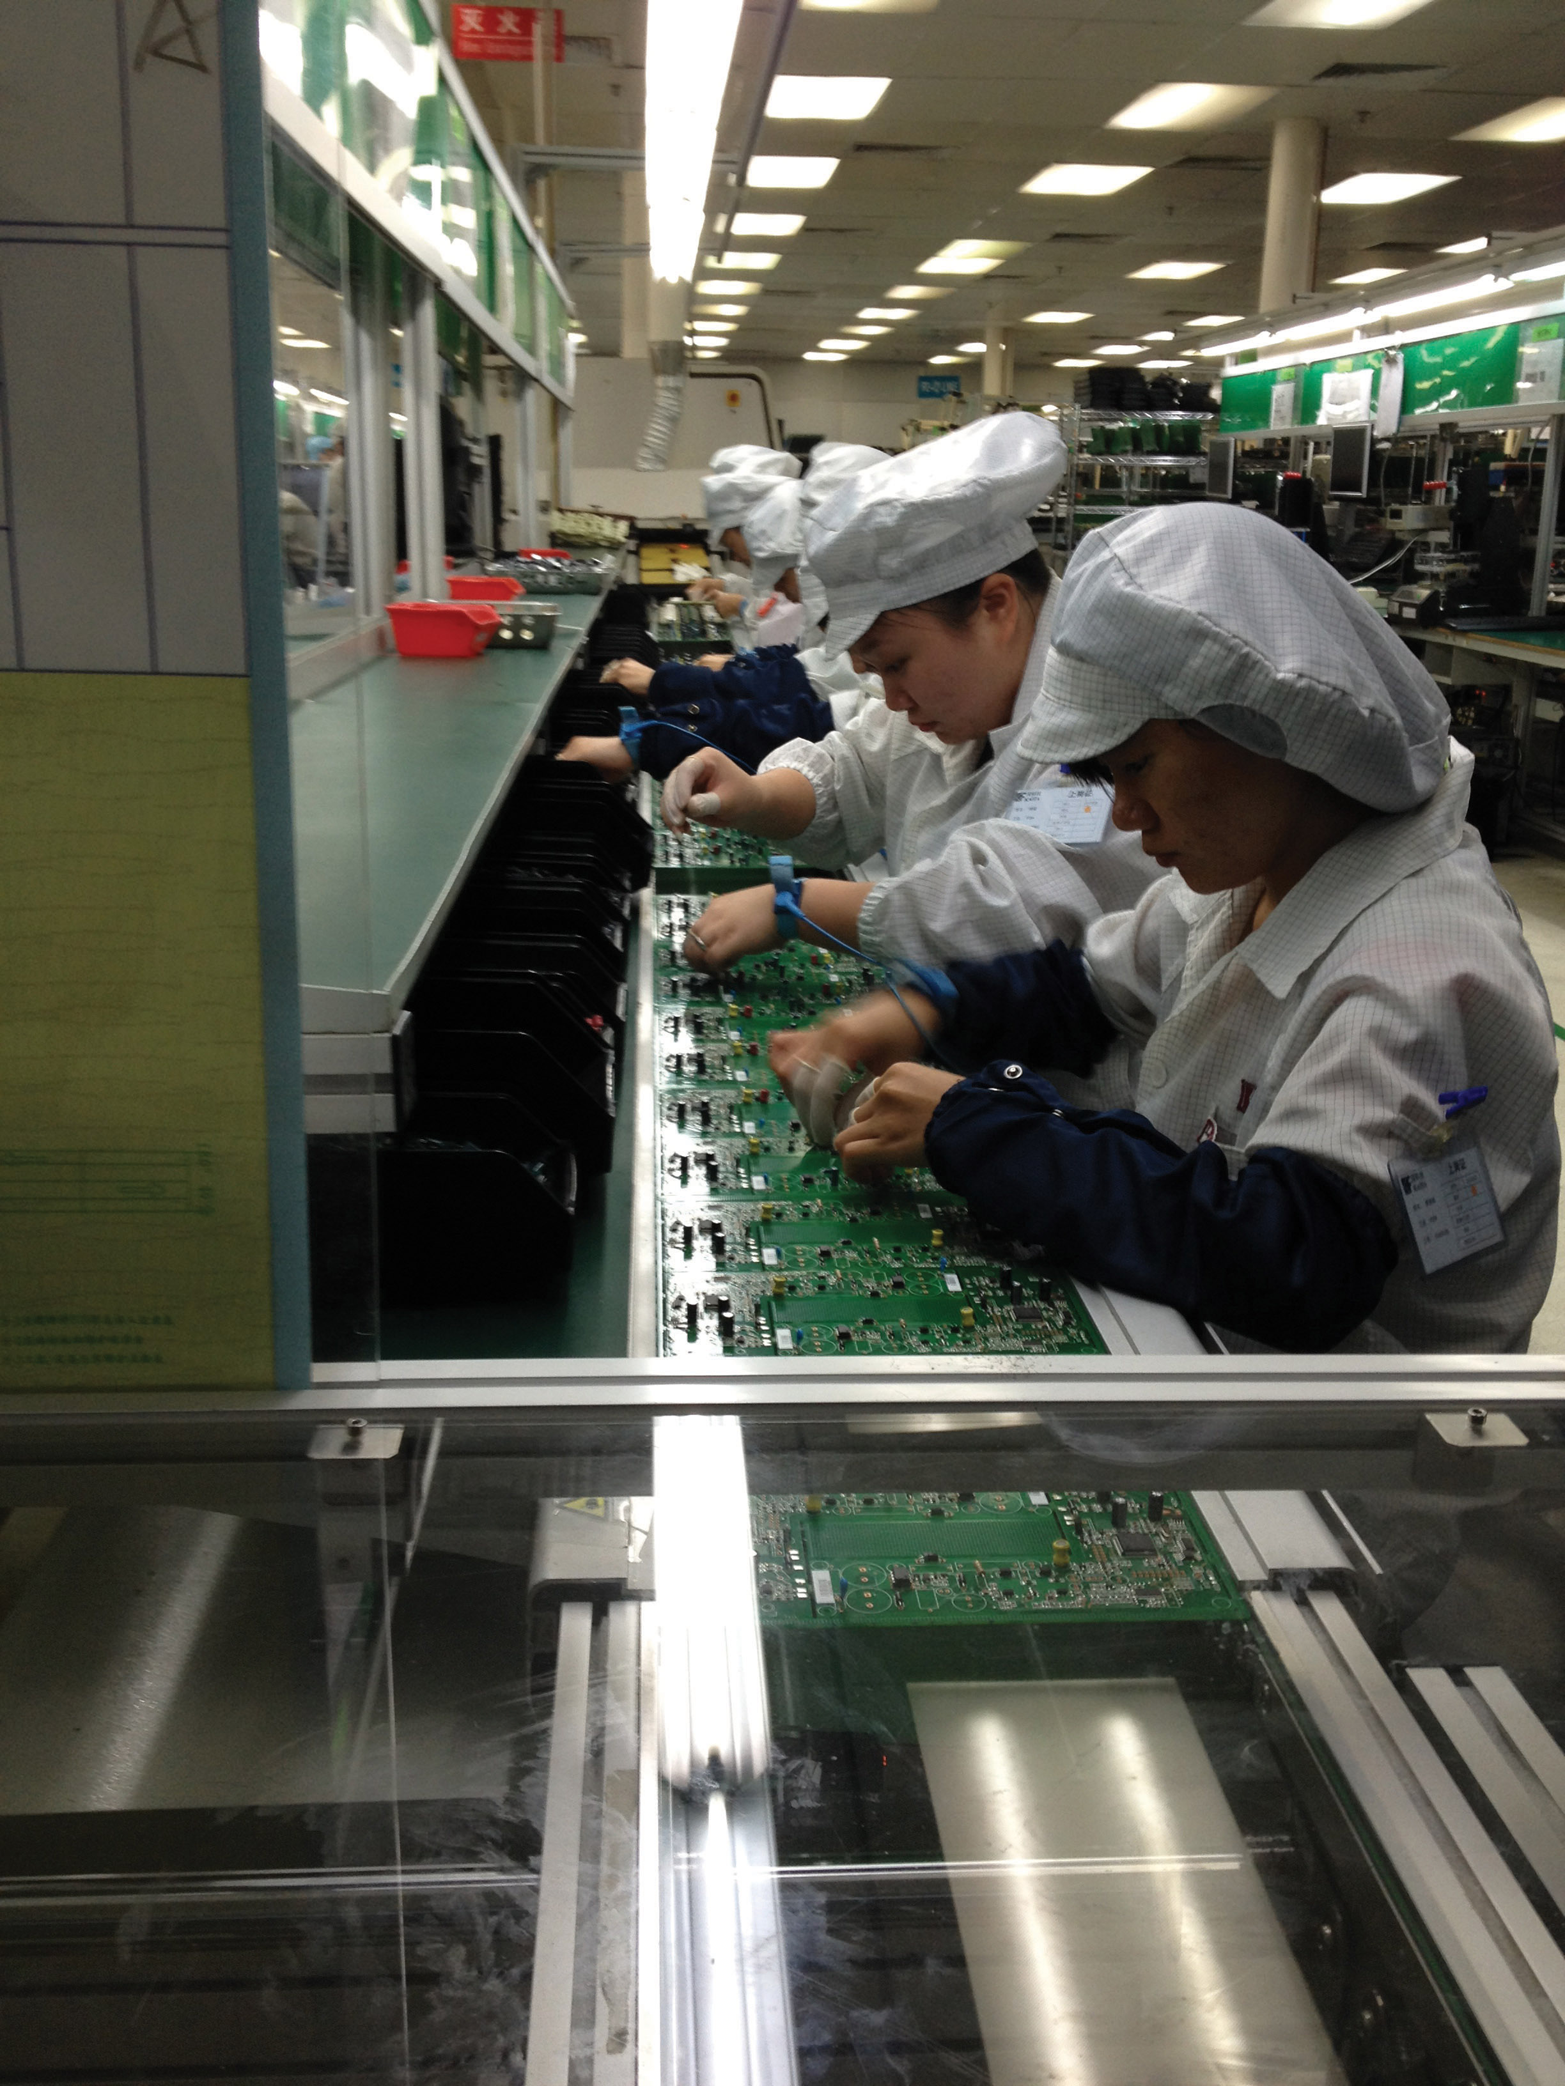 Factory workers in China assemble circuit boards. (Photo courtesy Dragon Innovation)